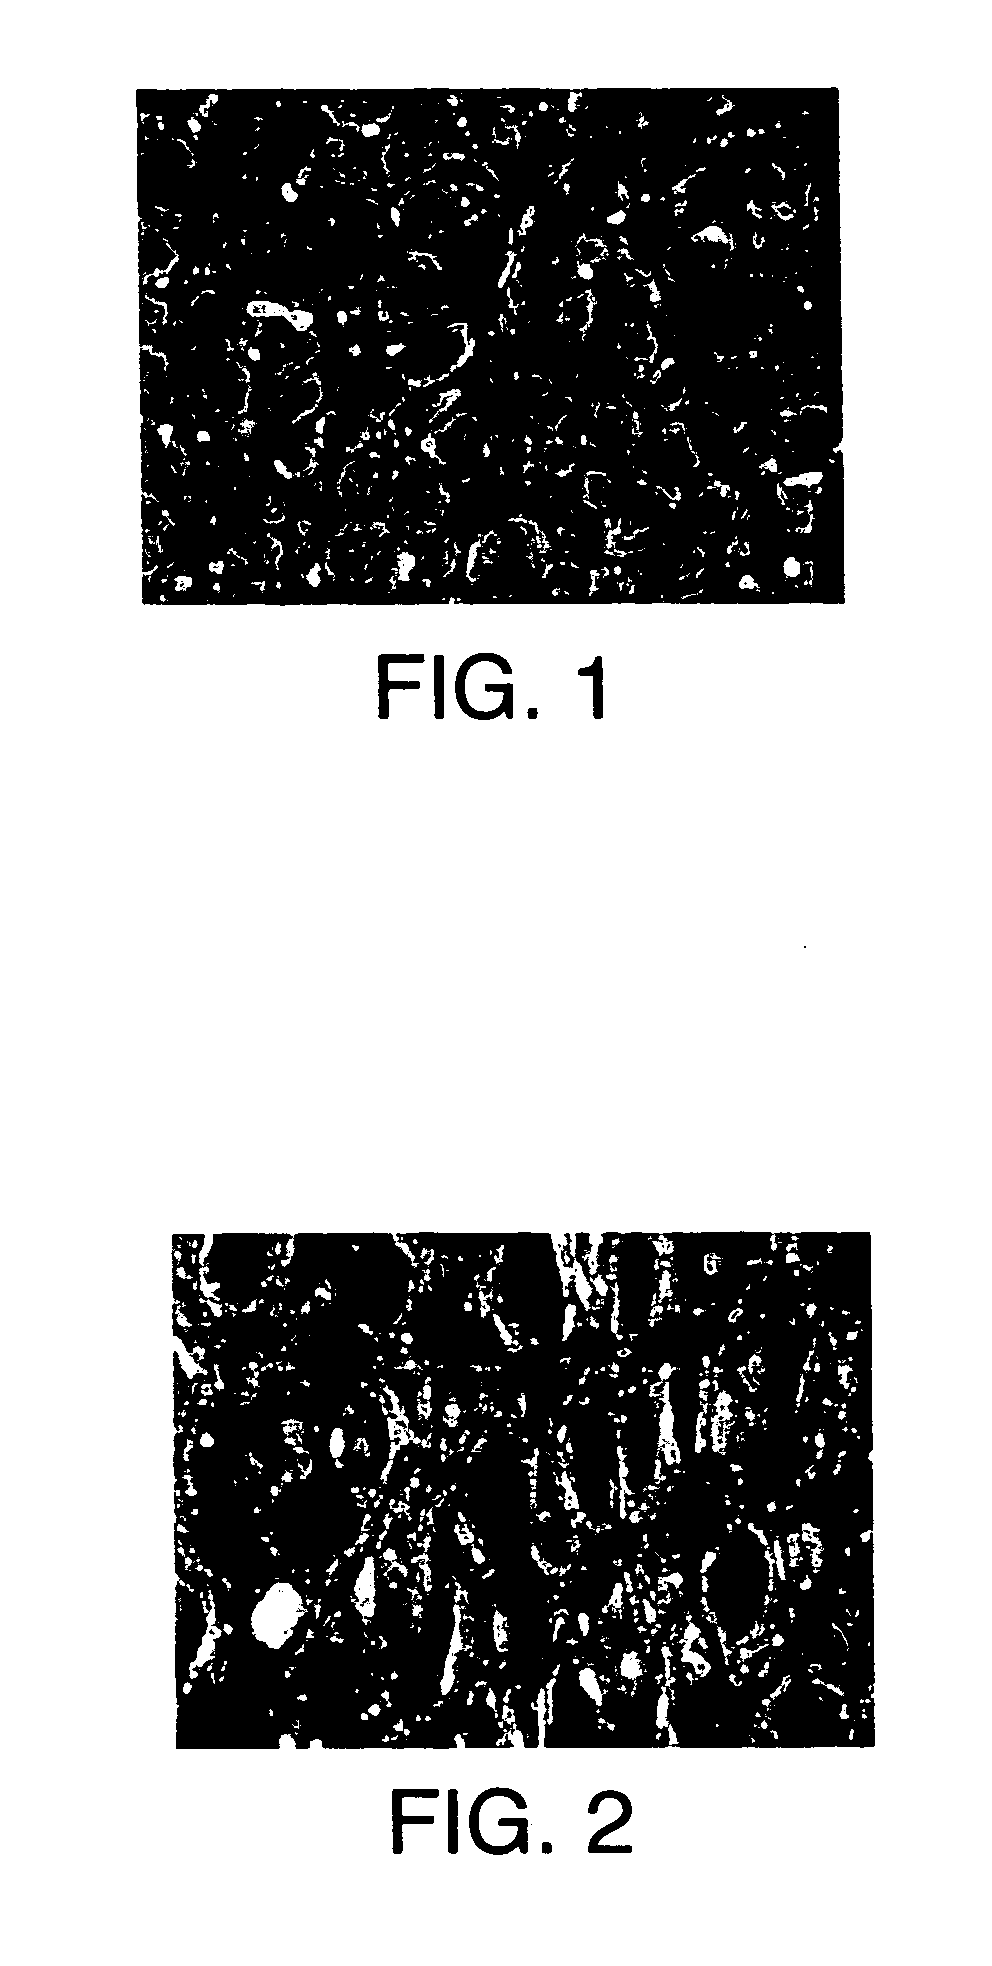 Process for producing metal foams having uniform cell structure